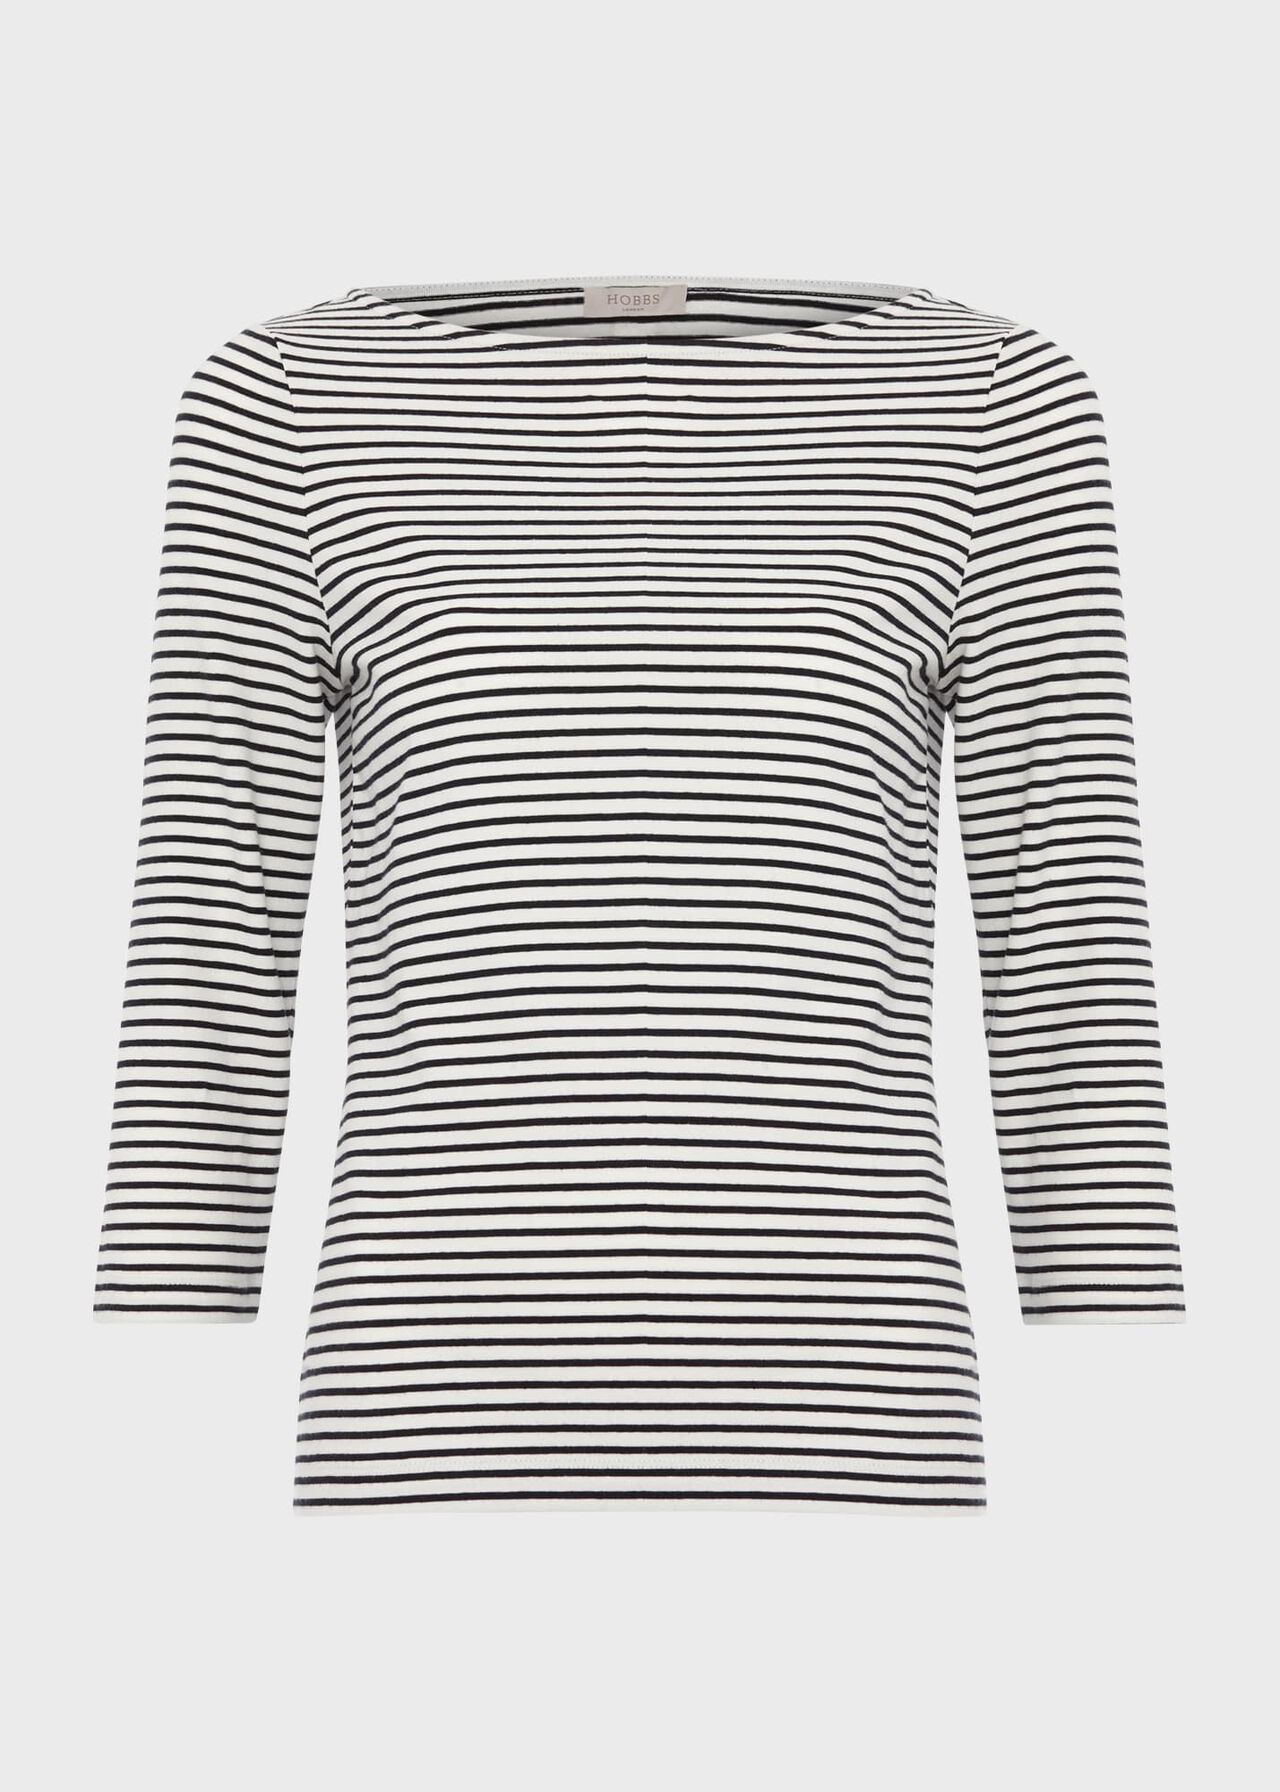 Mallory Cotton Blend Striped Top, Ivory Navy, hi-res